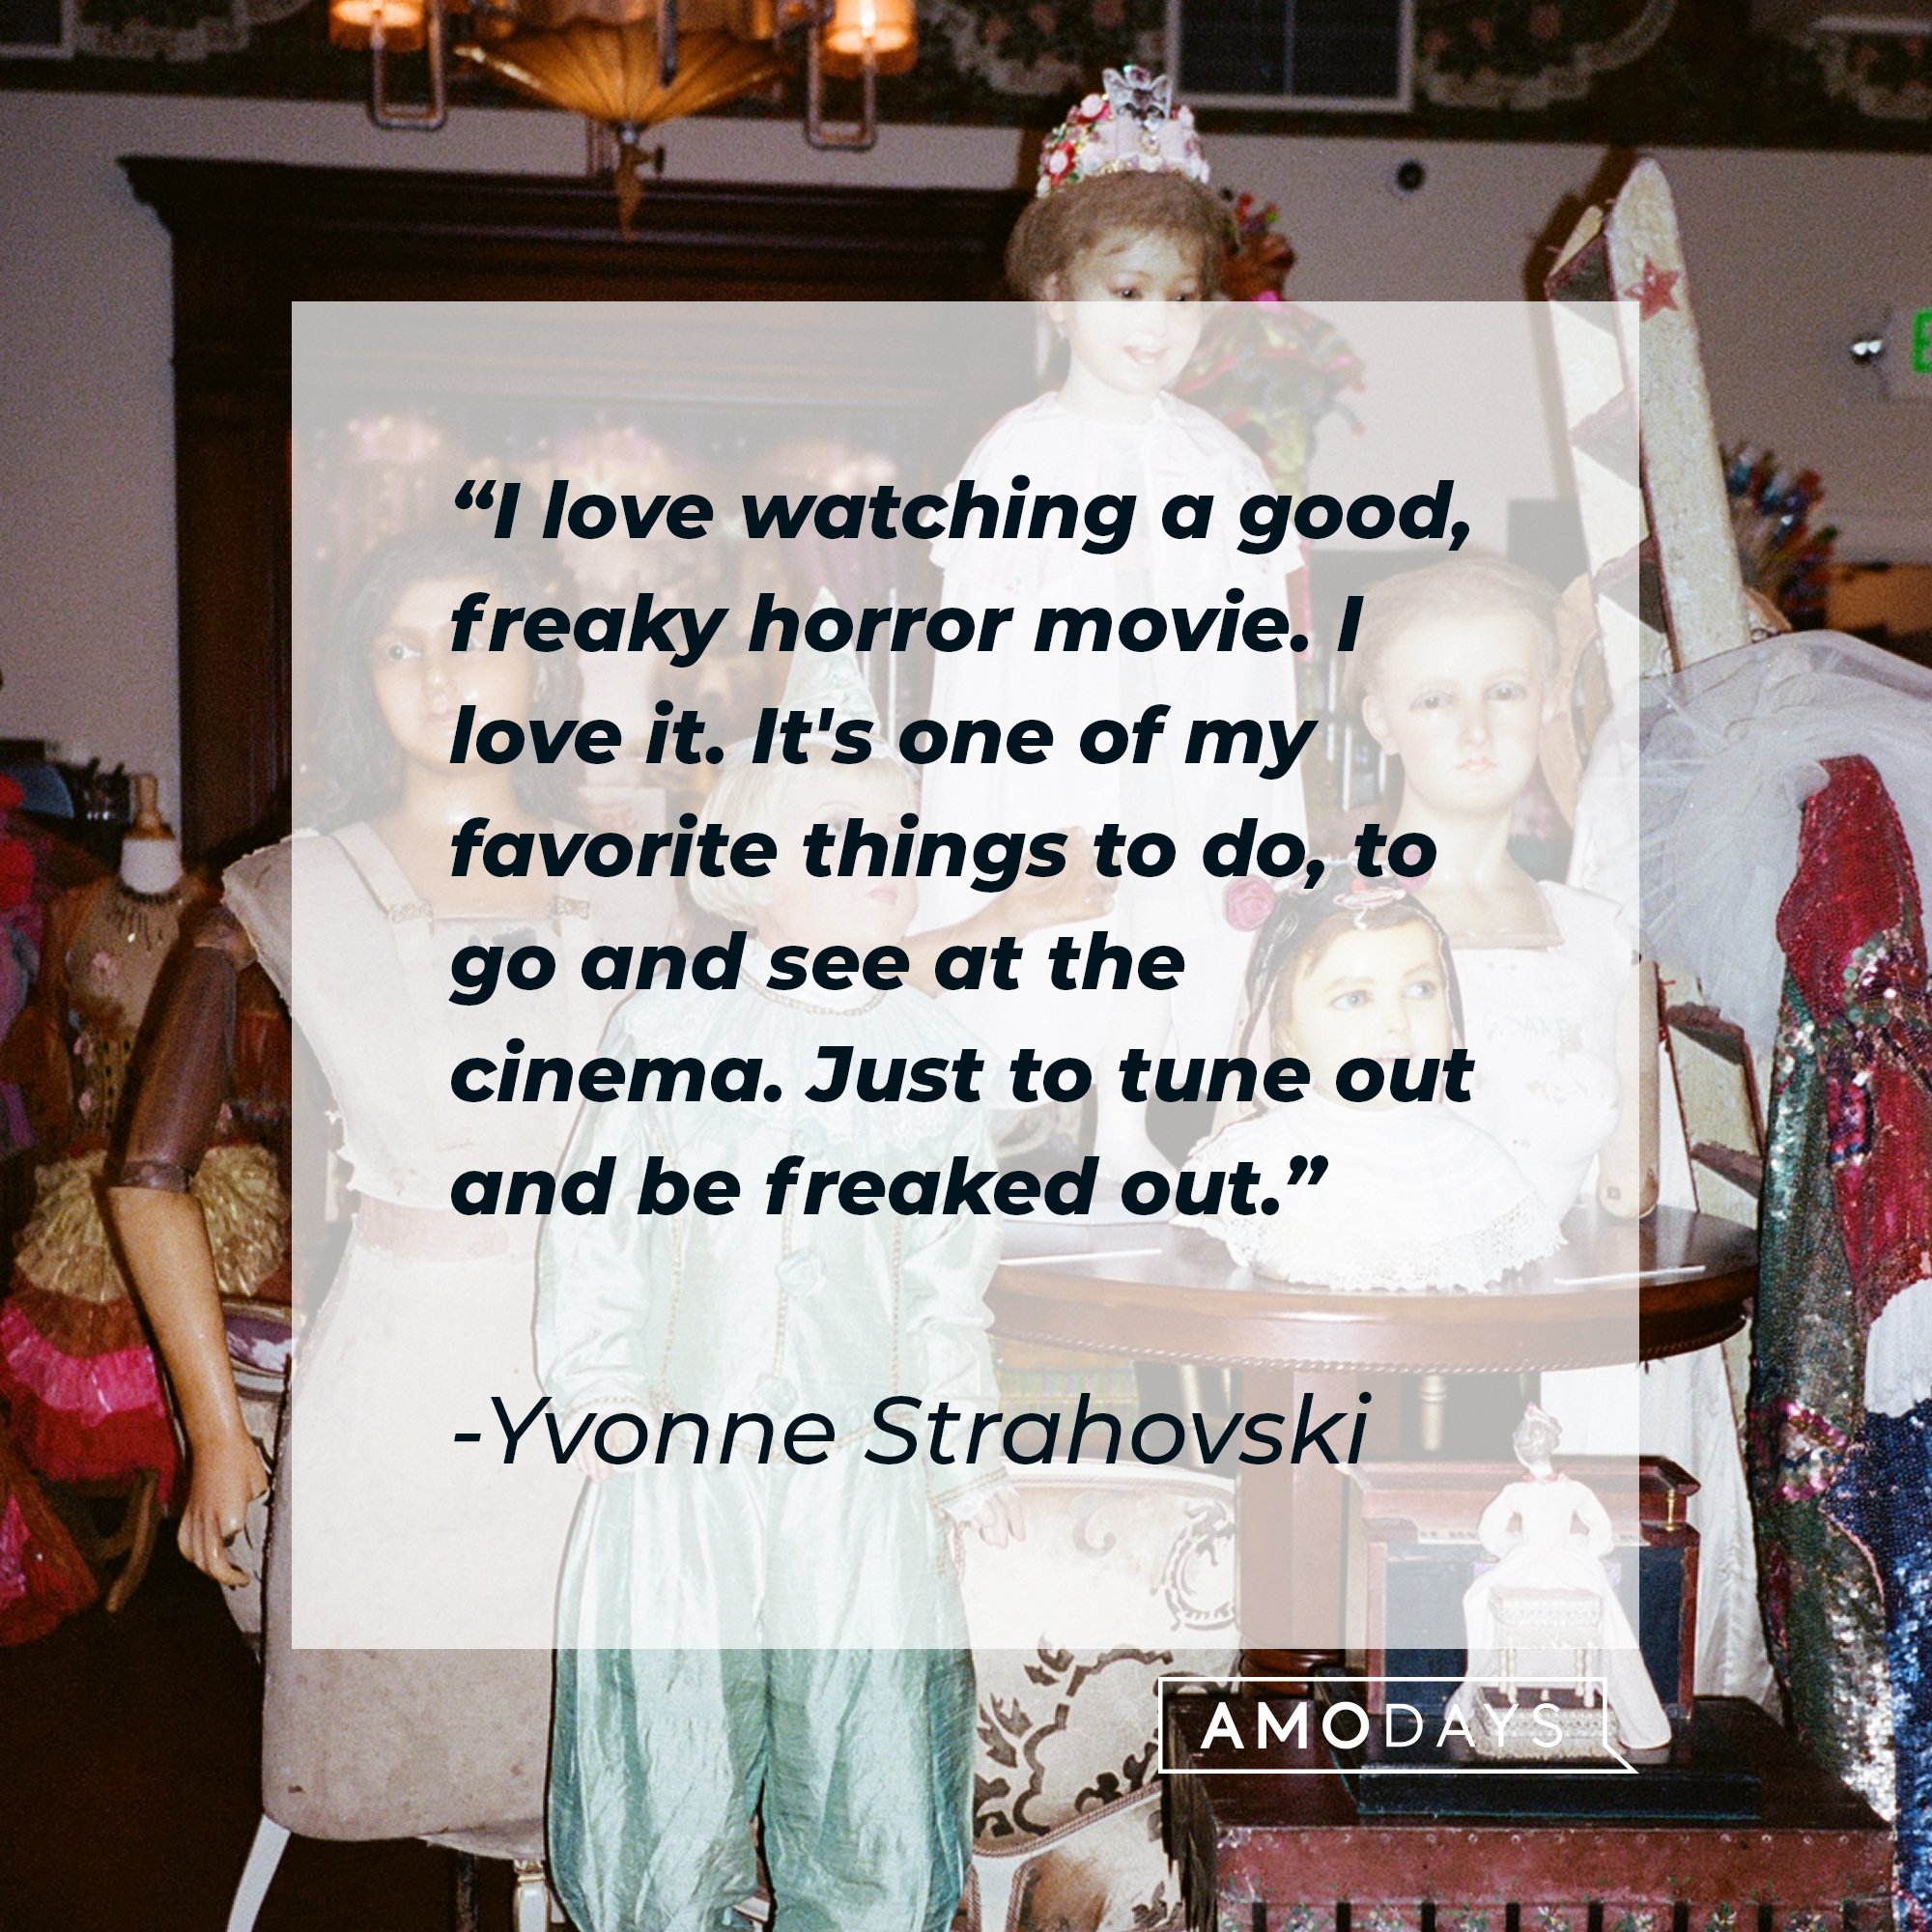 Yvonne Strahovski’s quote: "I love watching a good, freaky horror movie. I love it. It's one of my favorite things to do, to go and see at the cinema. Just to tune out and be freaked out." | Image: AmoDays